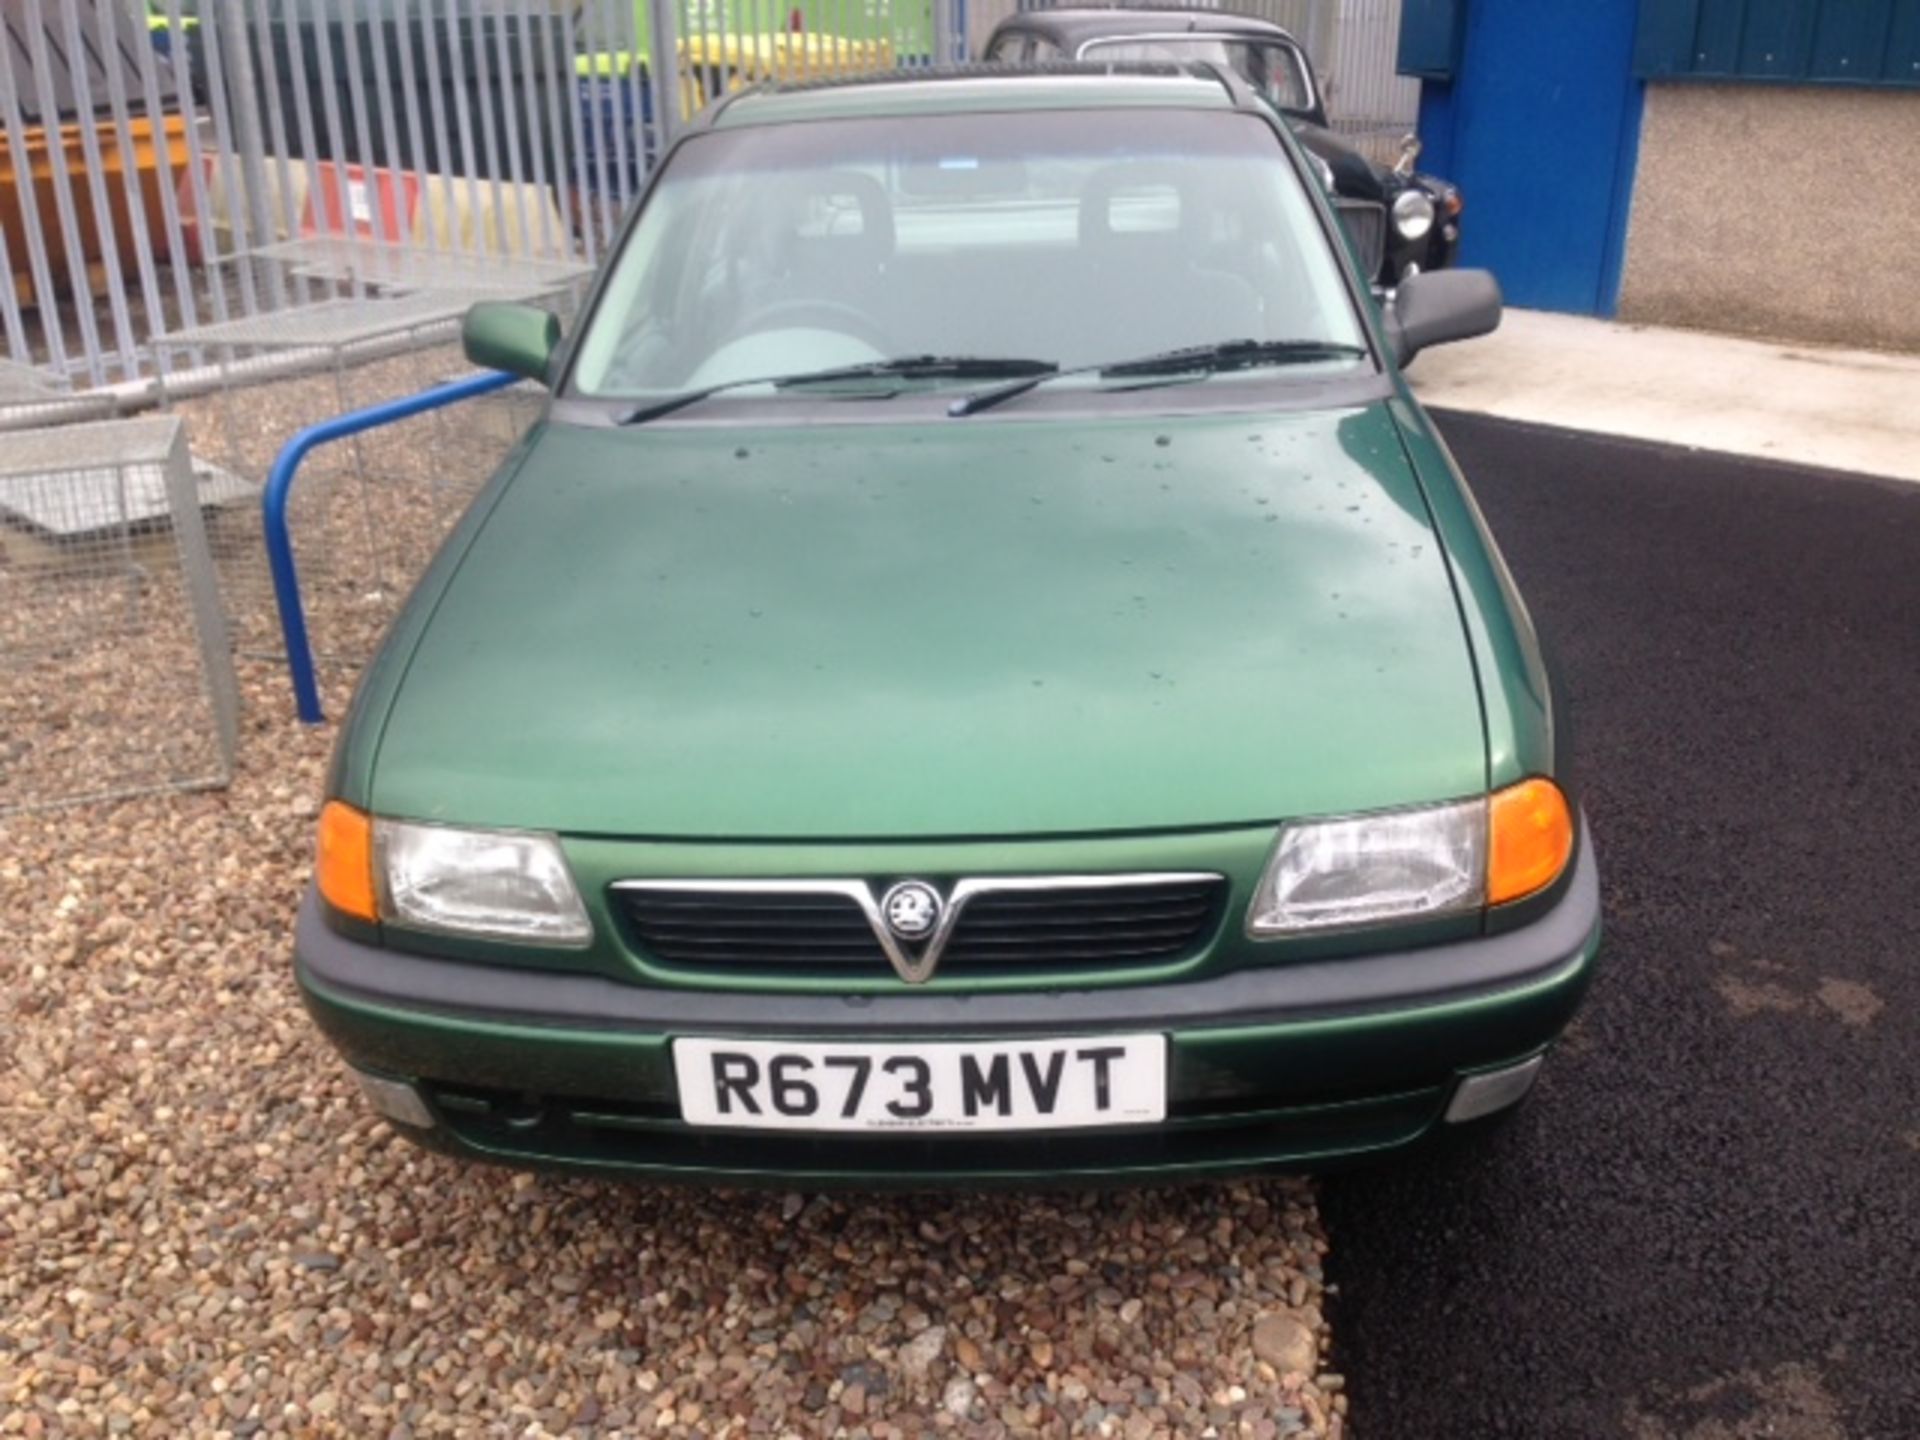 VAUXHALL, ASTRA LS - 1598cc, Chassis number W0L0TFF68W8058251 - presented in Rio Verde Green - Image 3 of 3